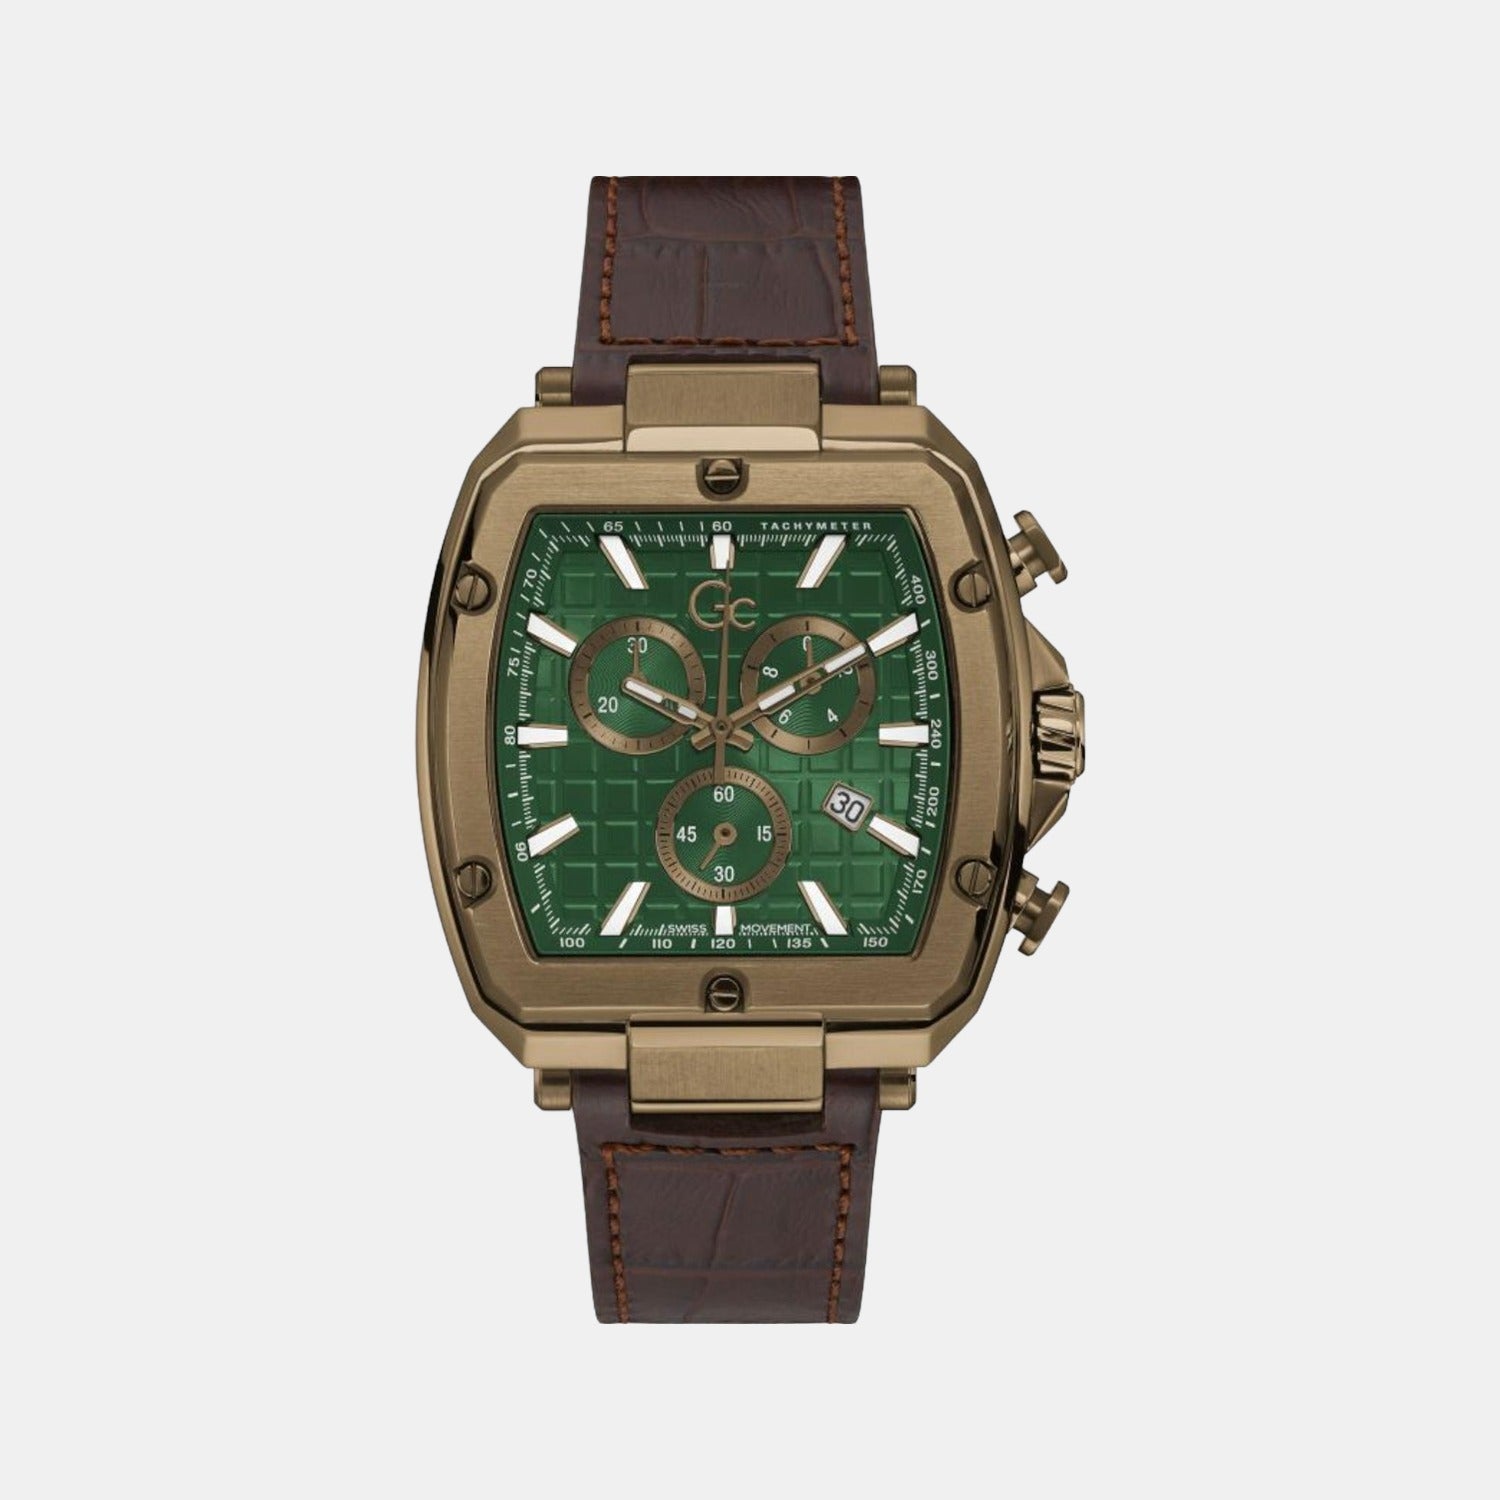 Male Green Leather Chronograph Watch Y83002G5MF